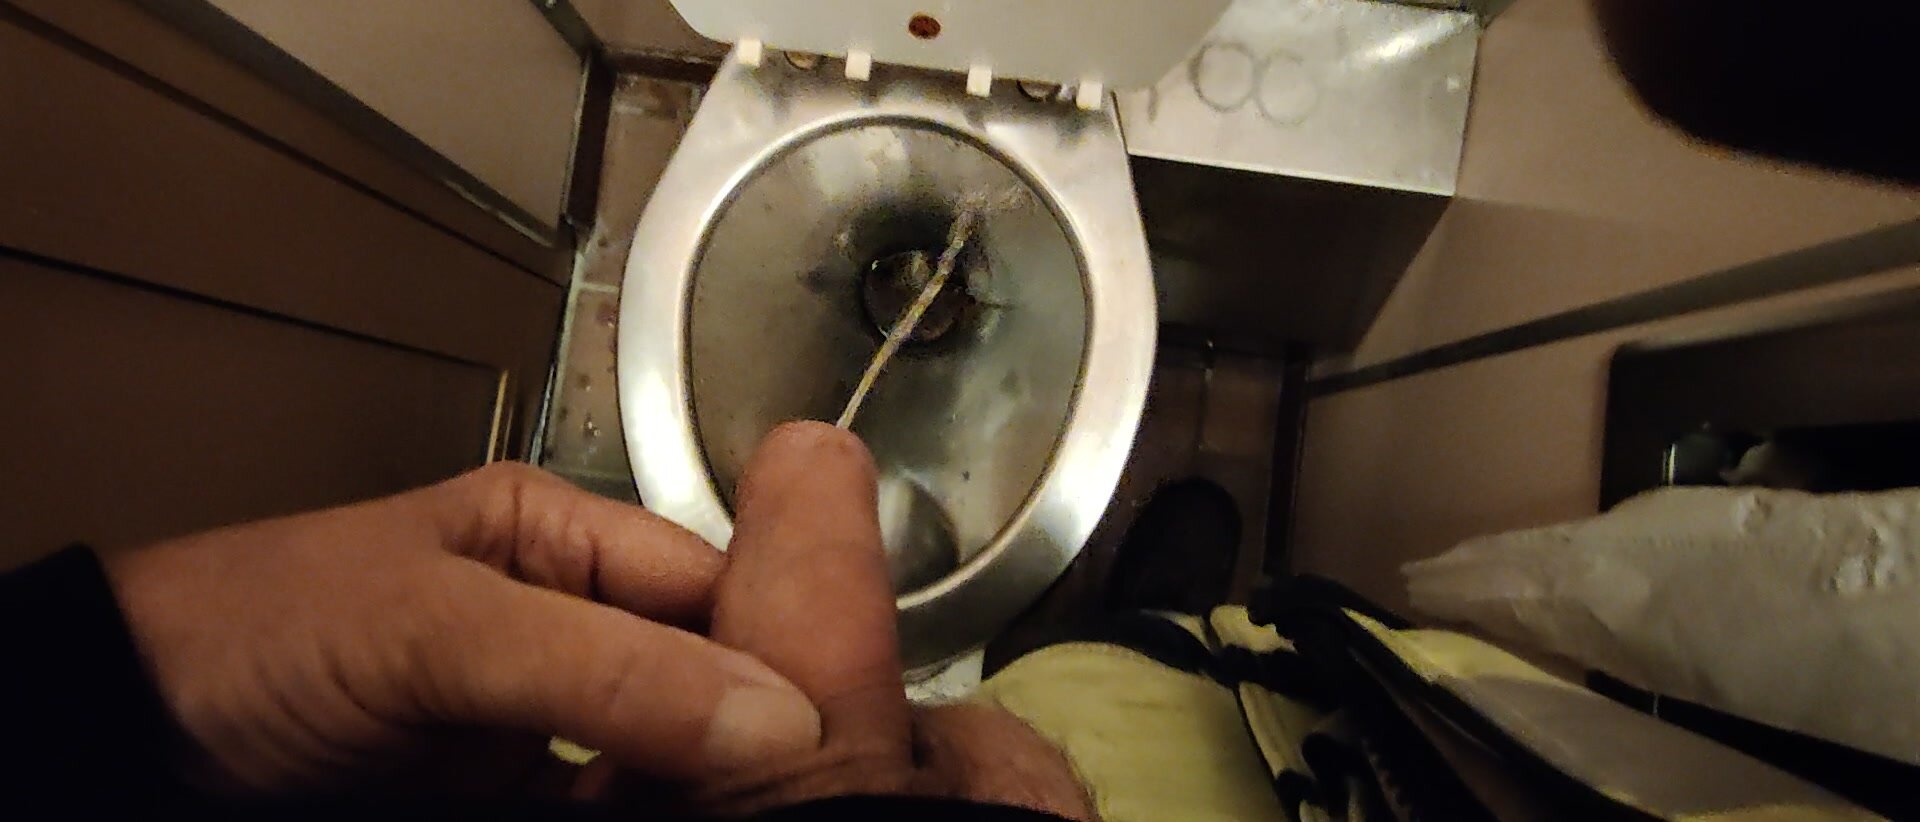 slave daddy pee's while at work